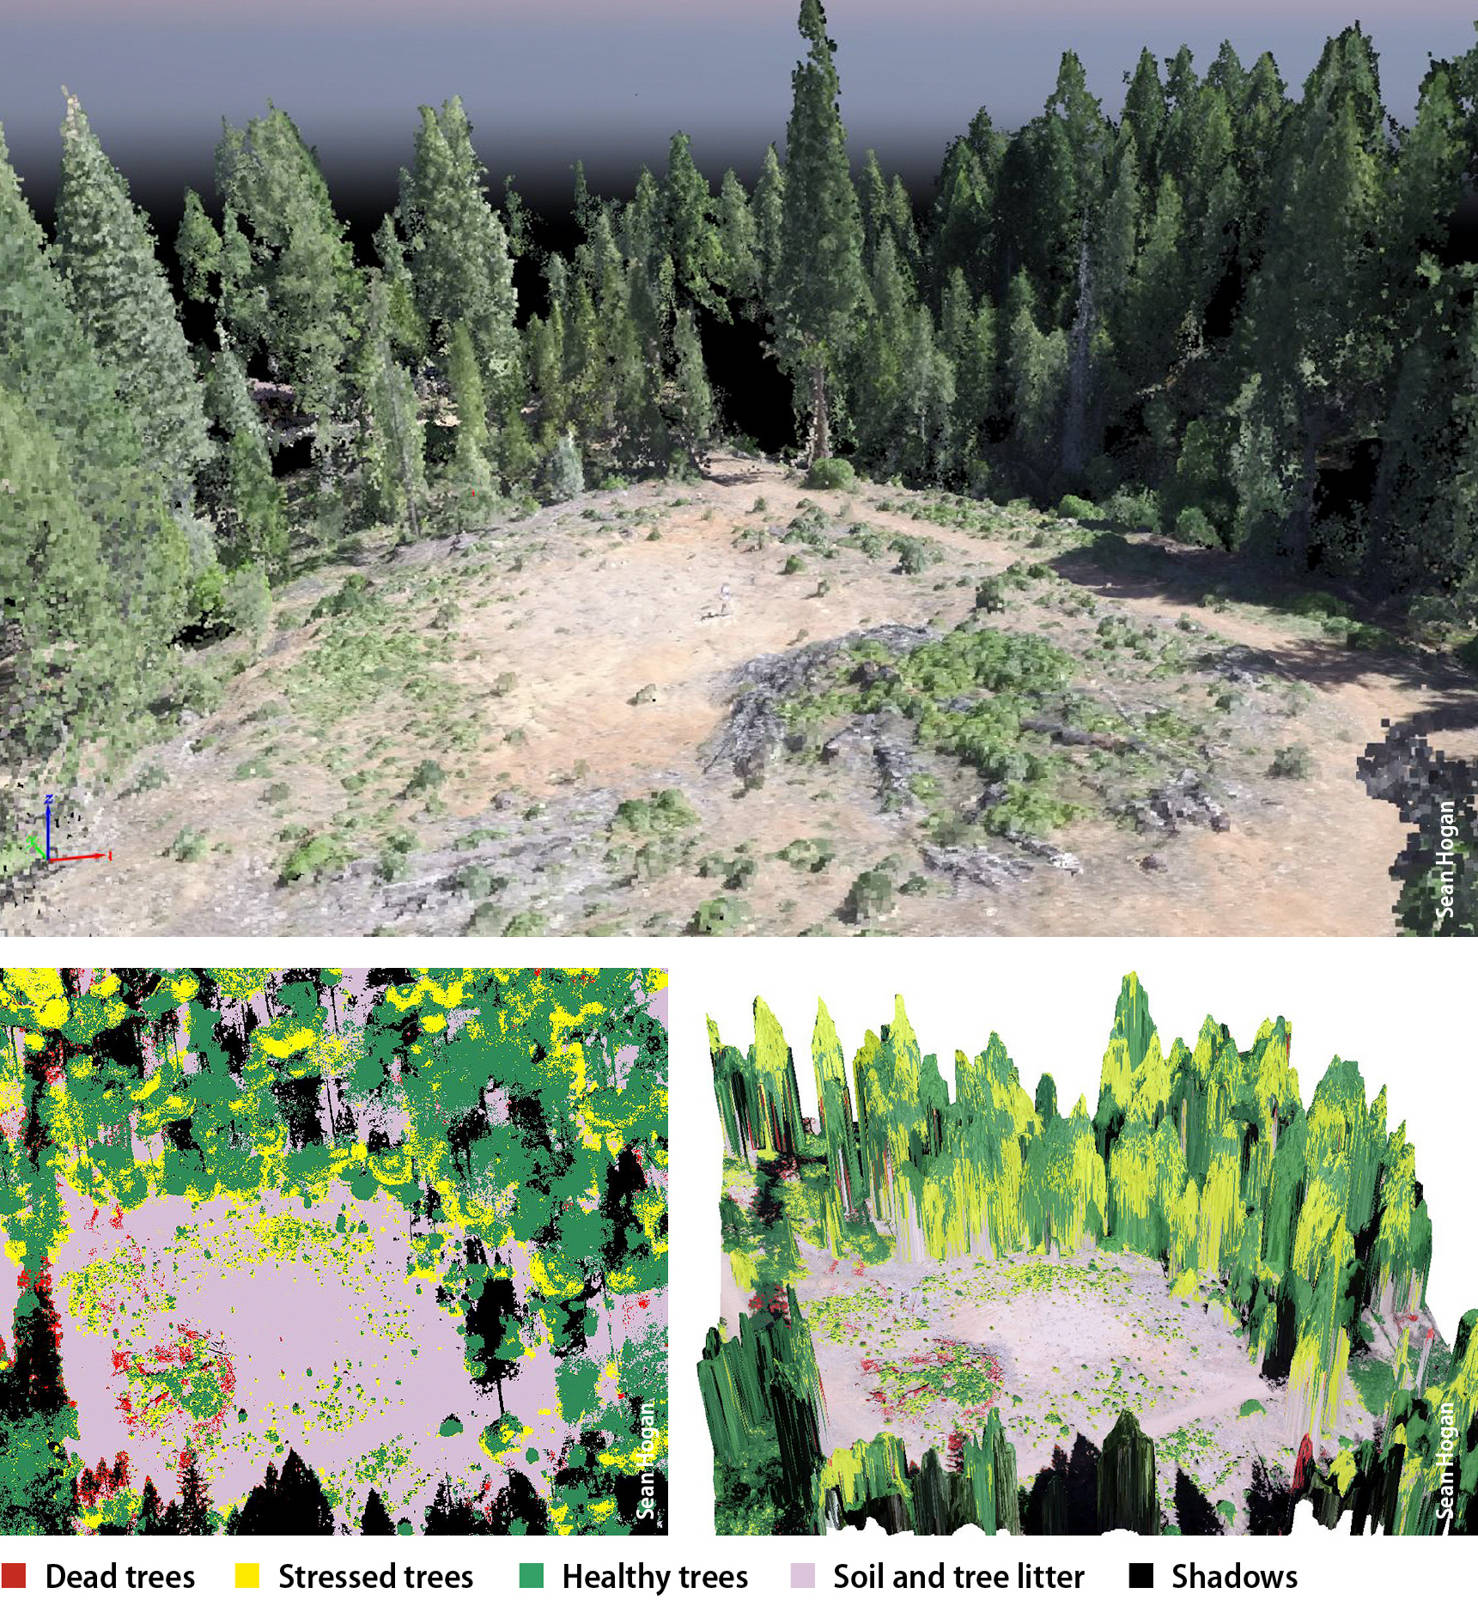 Photographic imagery gathered by a drone can be processed to enable early identification of trees stressed by bark beetles across a large area. The image at top shows a colorized point cloud, a 3-D representation of a stand of trees. The lower two images depict the same stand of trees (from slightly different angles); an analysis based on differences in foliage color is used to classify trees as healthy, stressed or dead. Images were collected with a GoPro 12-megapixel camera.